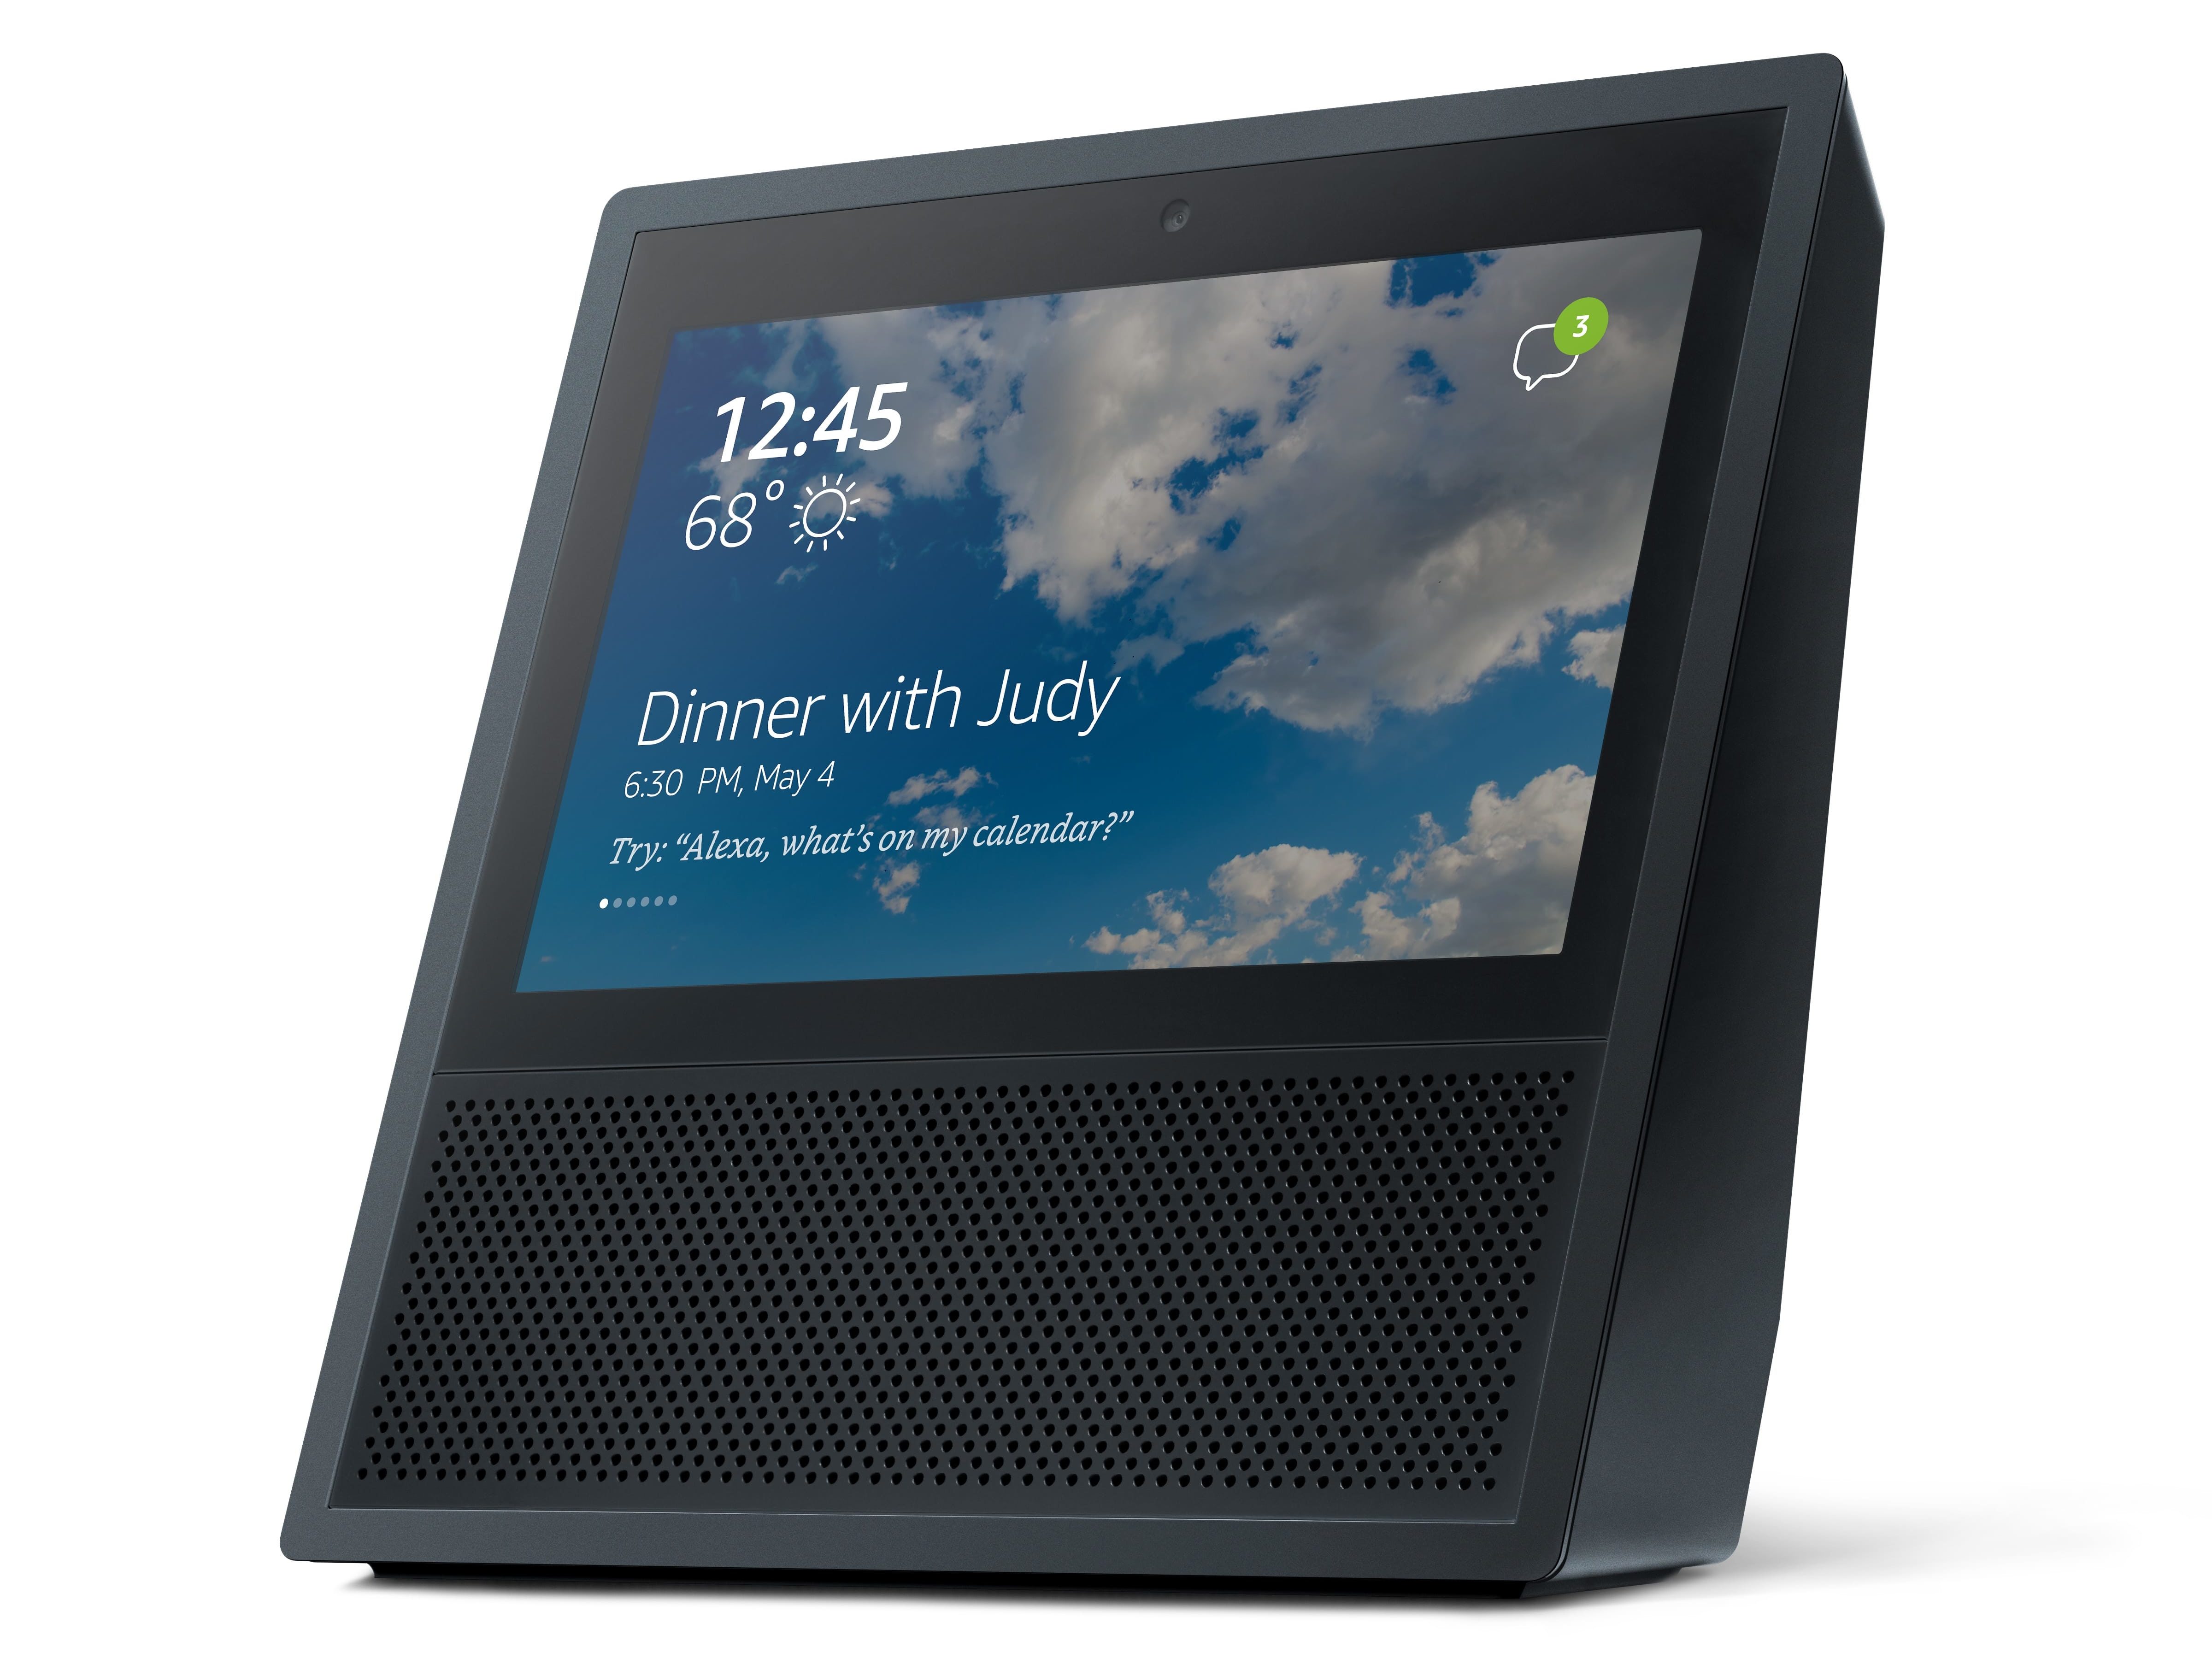 This is the best deal yet on Amazon Echo Show.